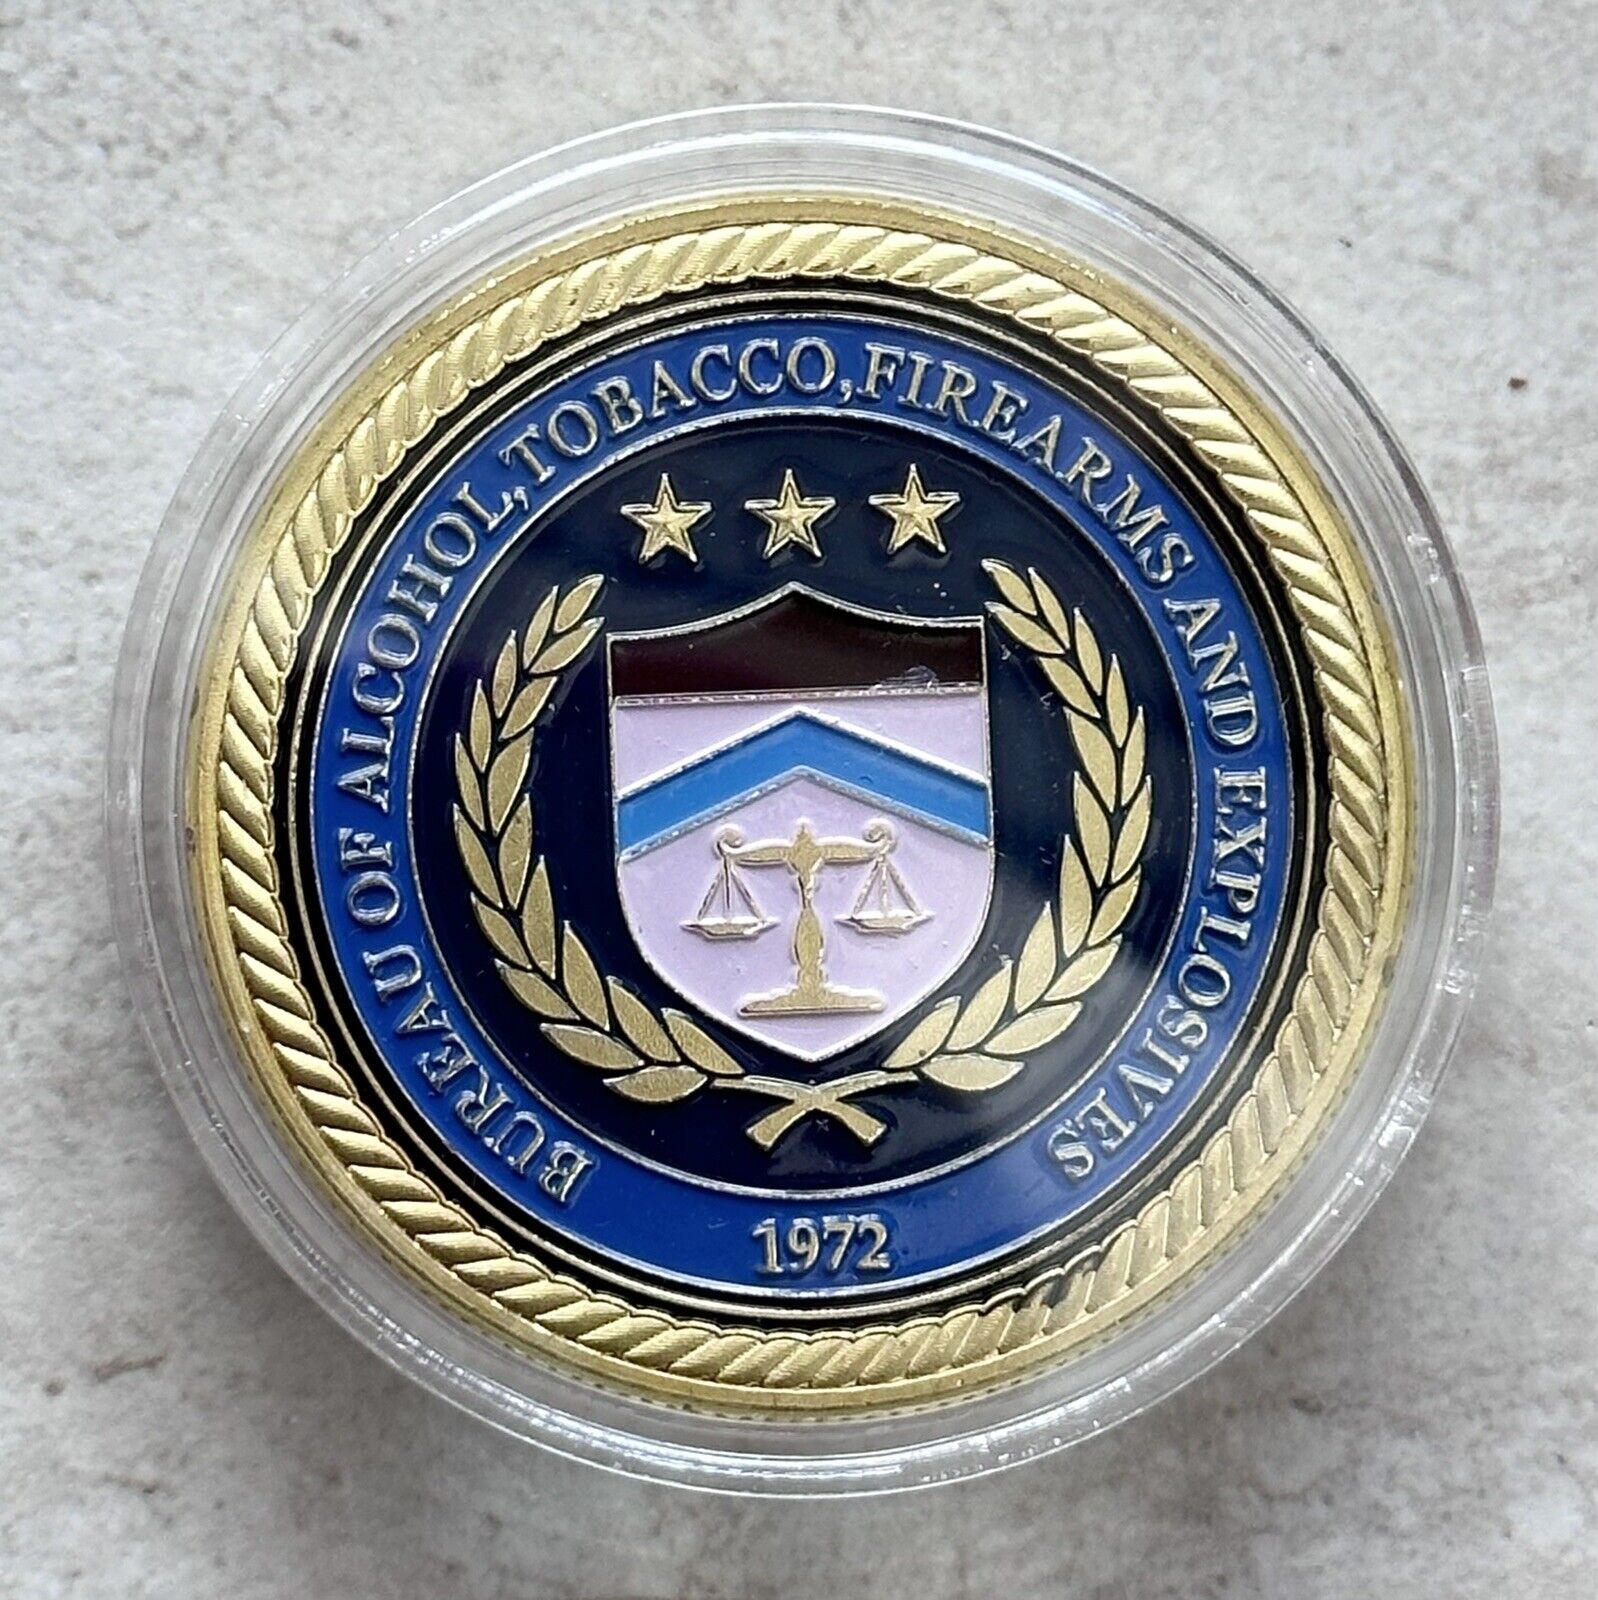 DEPT OF ALCOHOL, TOBACCO, FIREARMS & EXPLOSIVES (ATF) Challenge Coin 